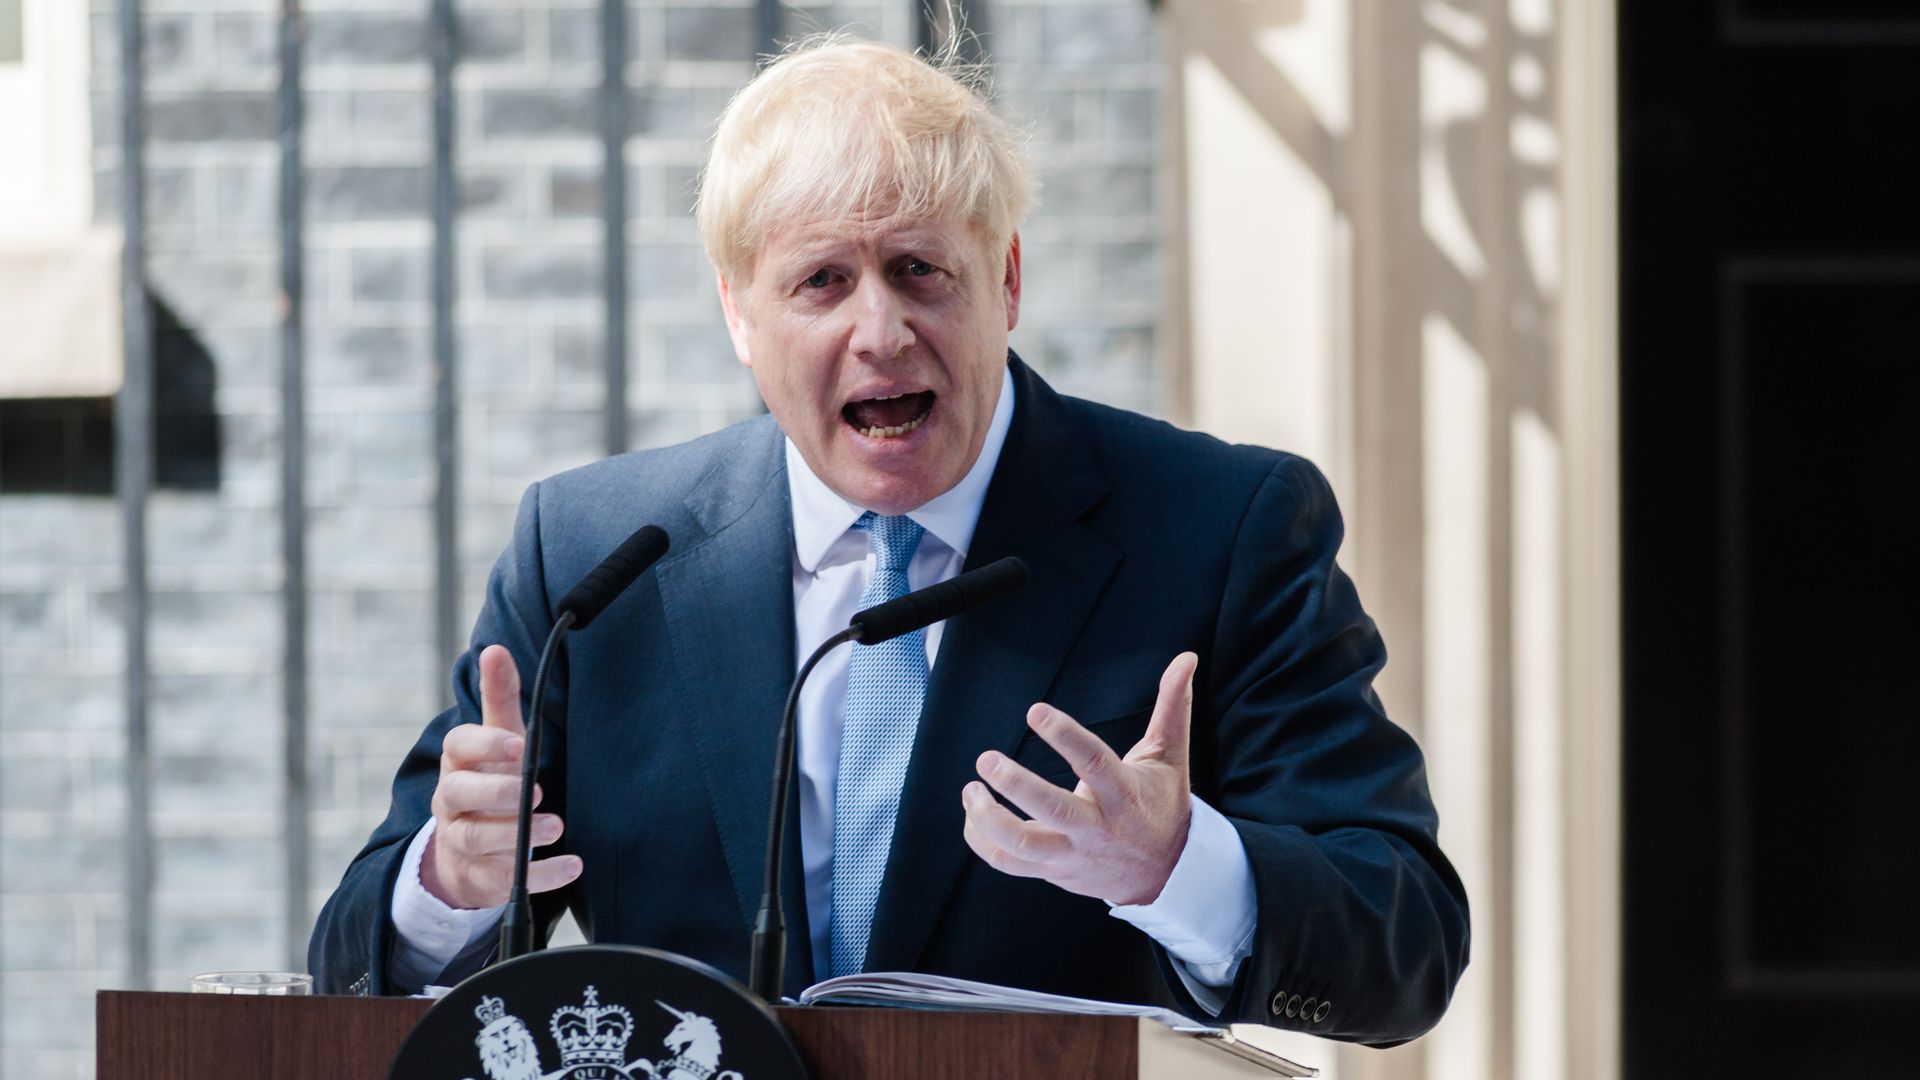 Boris Johnson delivers his first speech as the new Prime Minister of the United Kingdom outside 10 Downing Street on 24 July